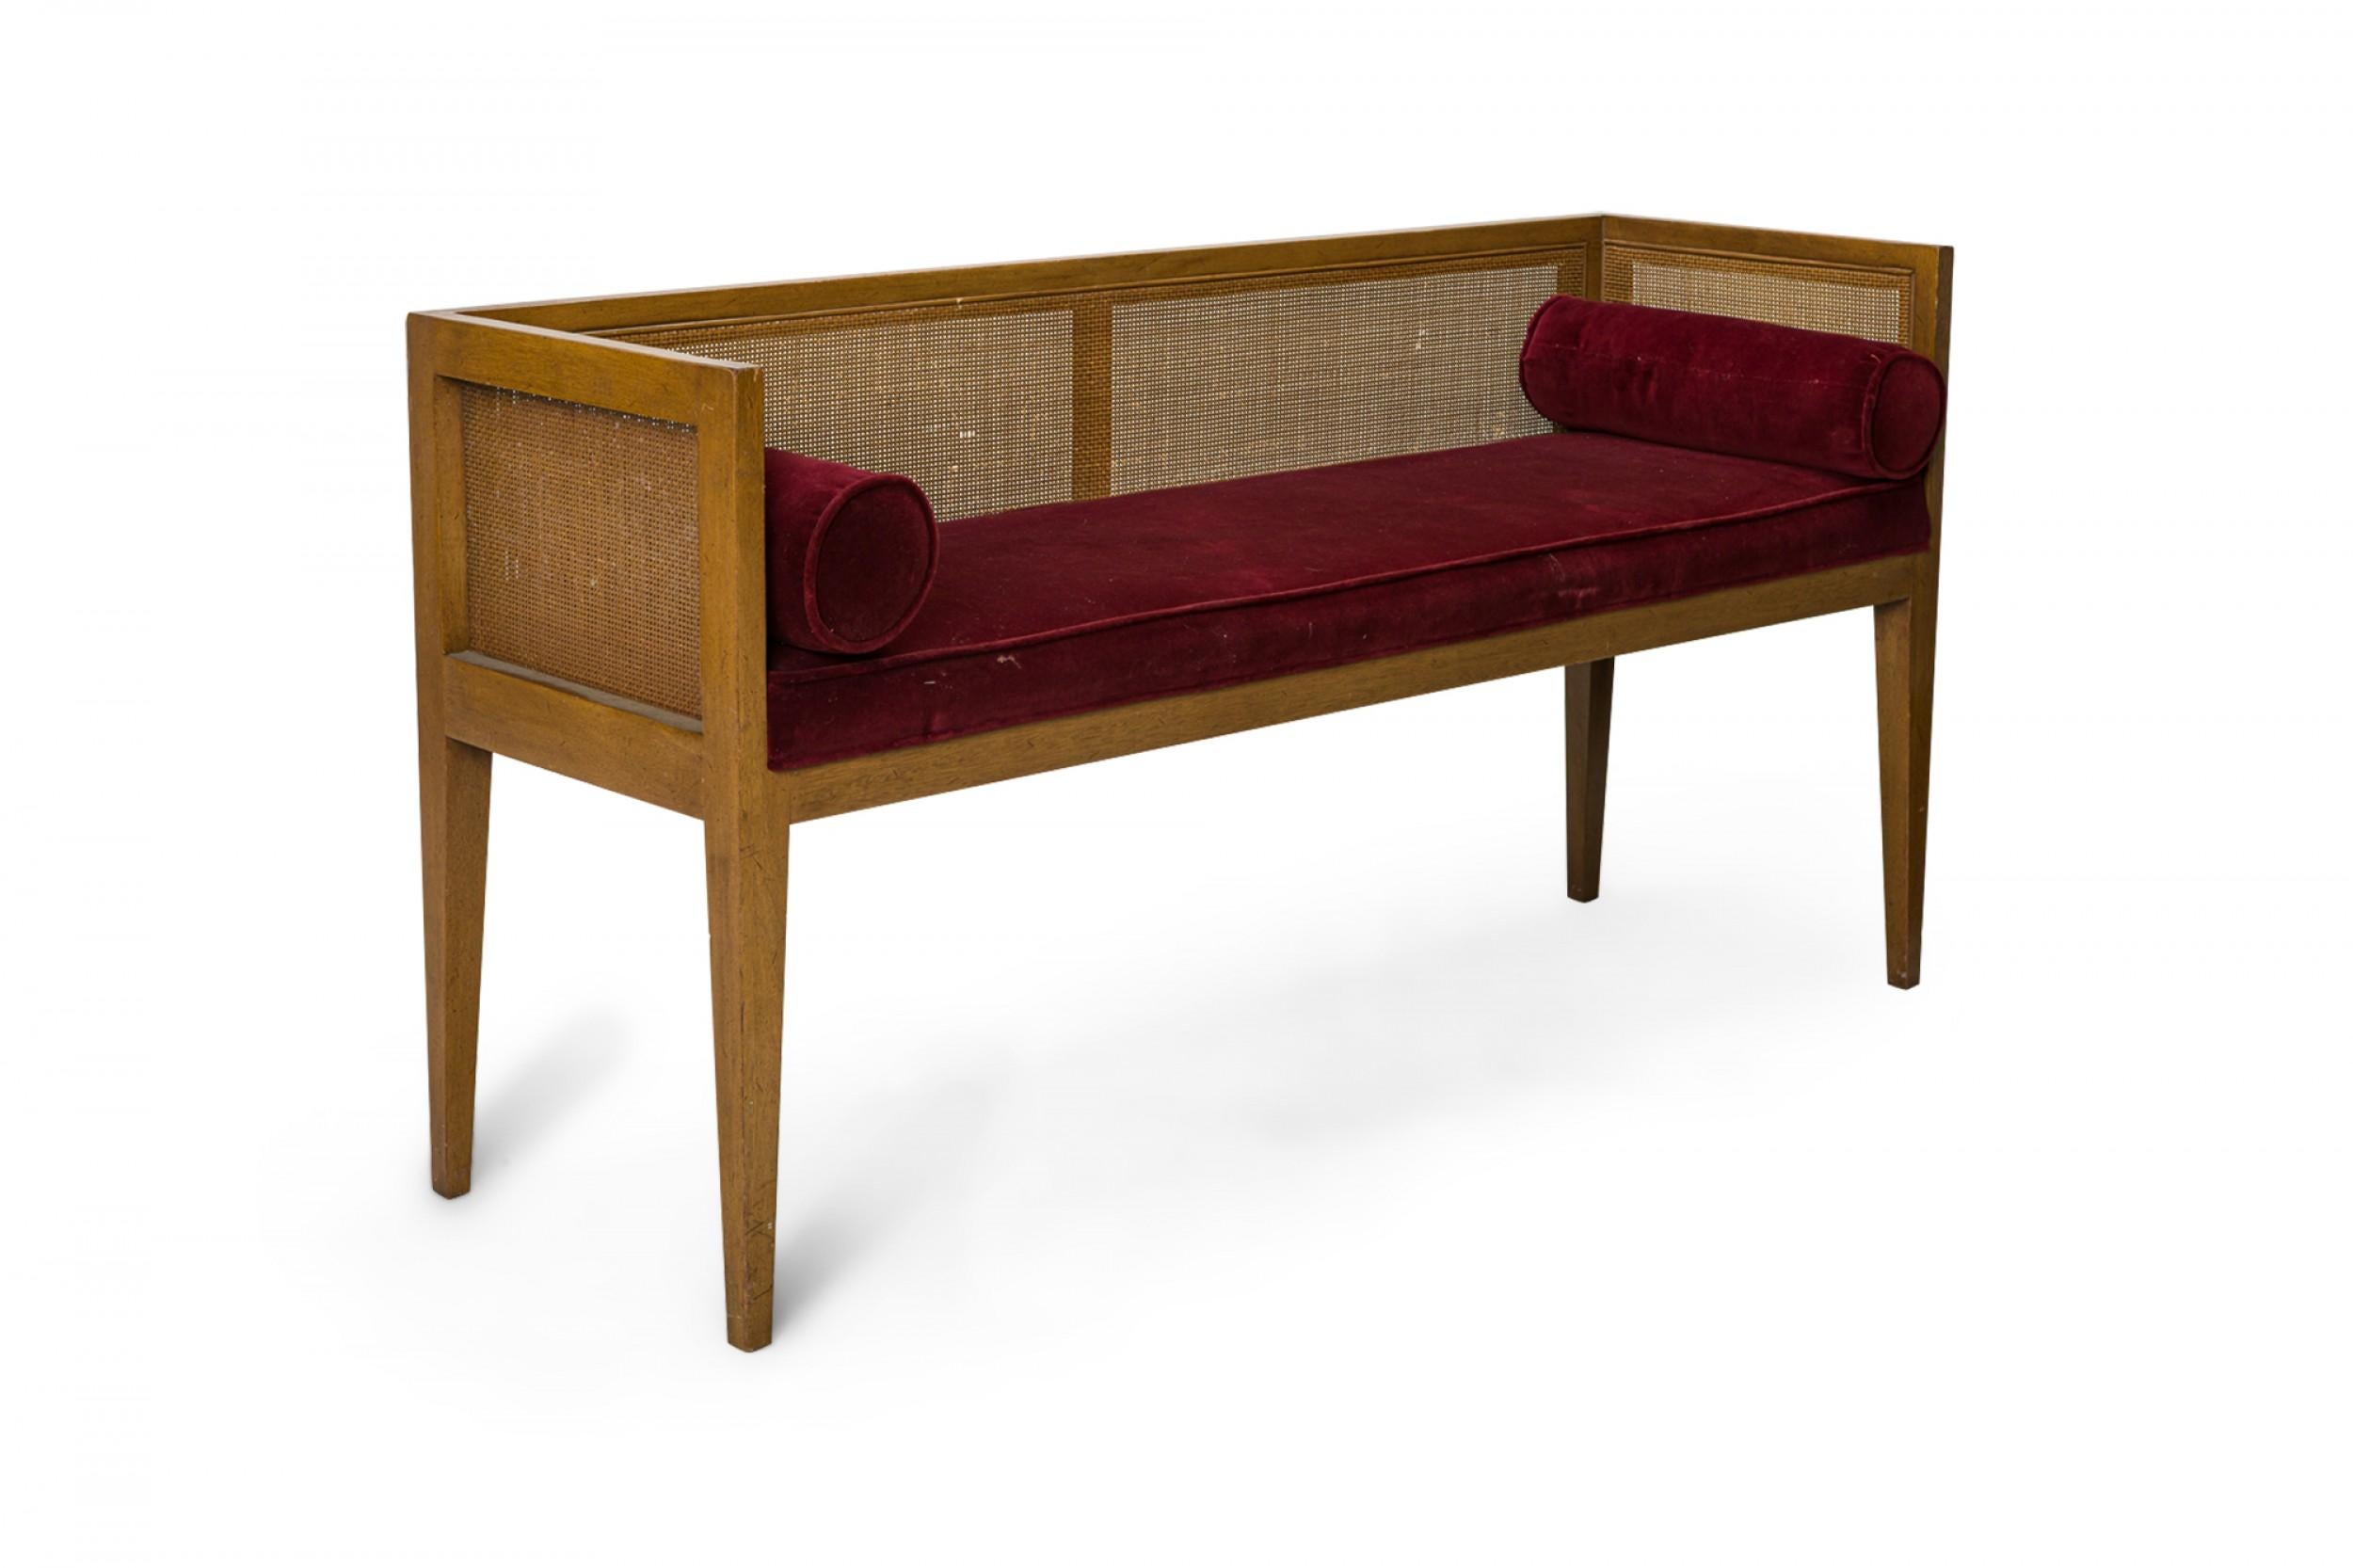 American mid-century entry bench with a rectangular walnut frame with caned back and sides, with an upholstered seat cushion in a deep burgundy velour upholstery with matching piping and two matching bolster pillows.